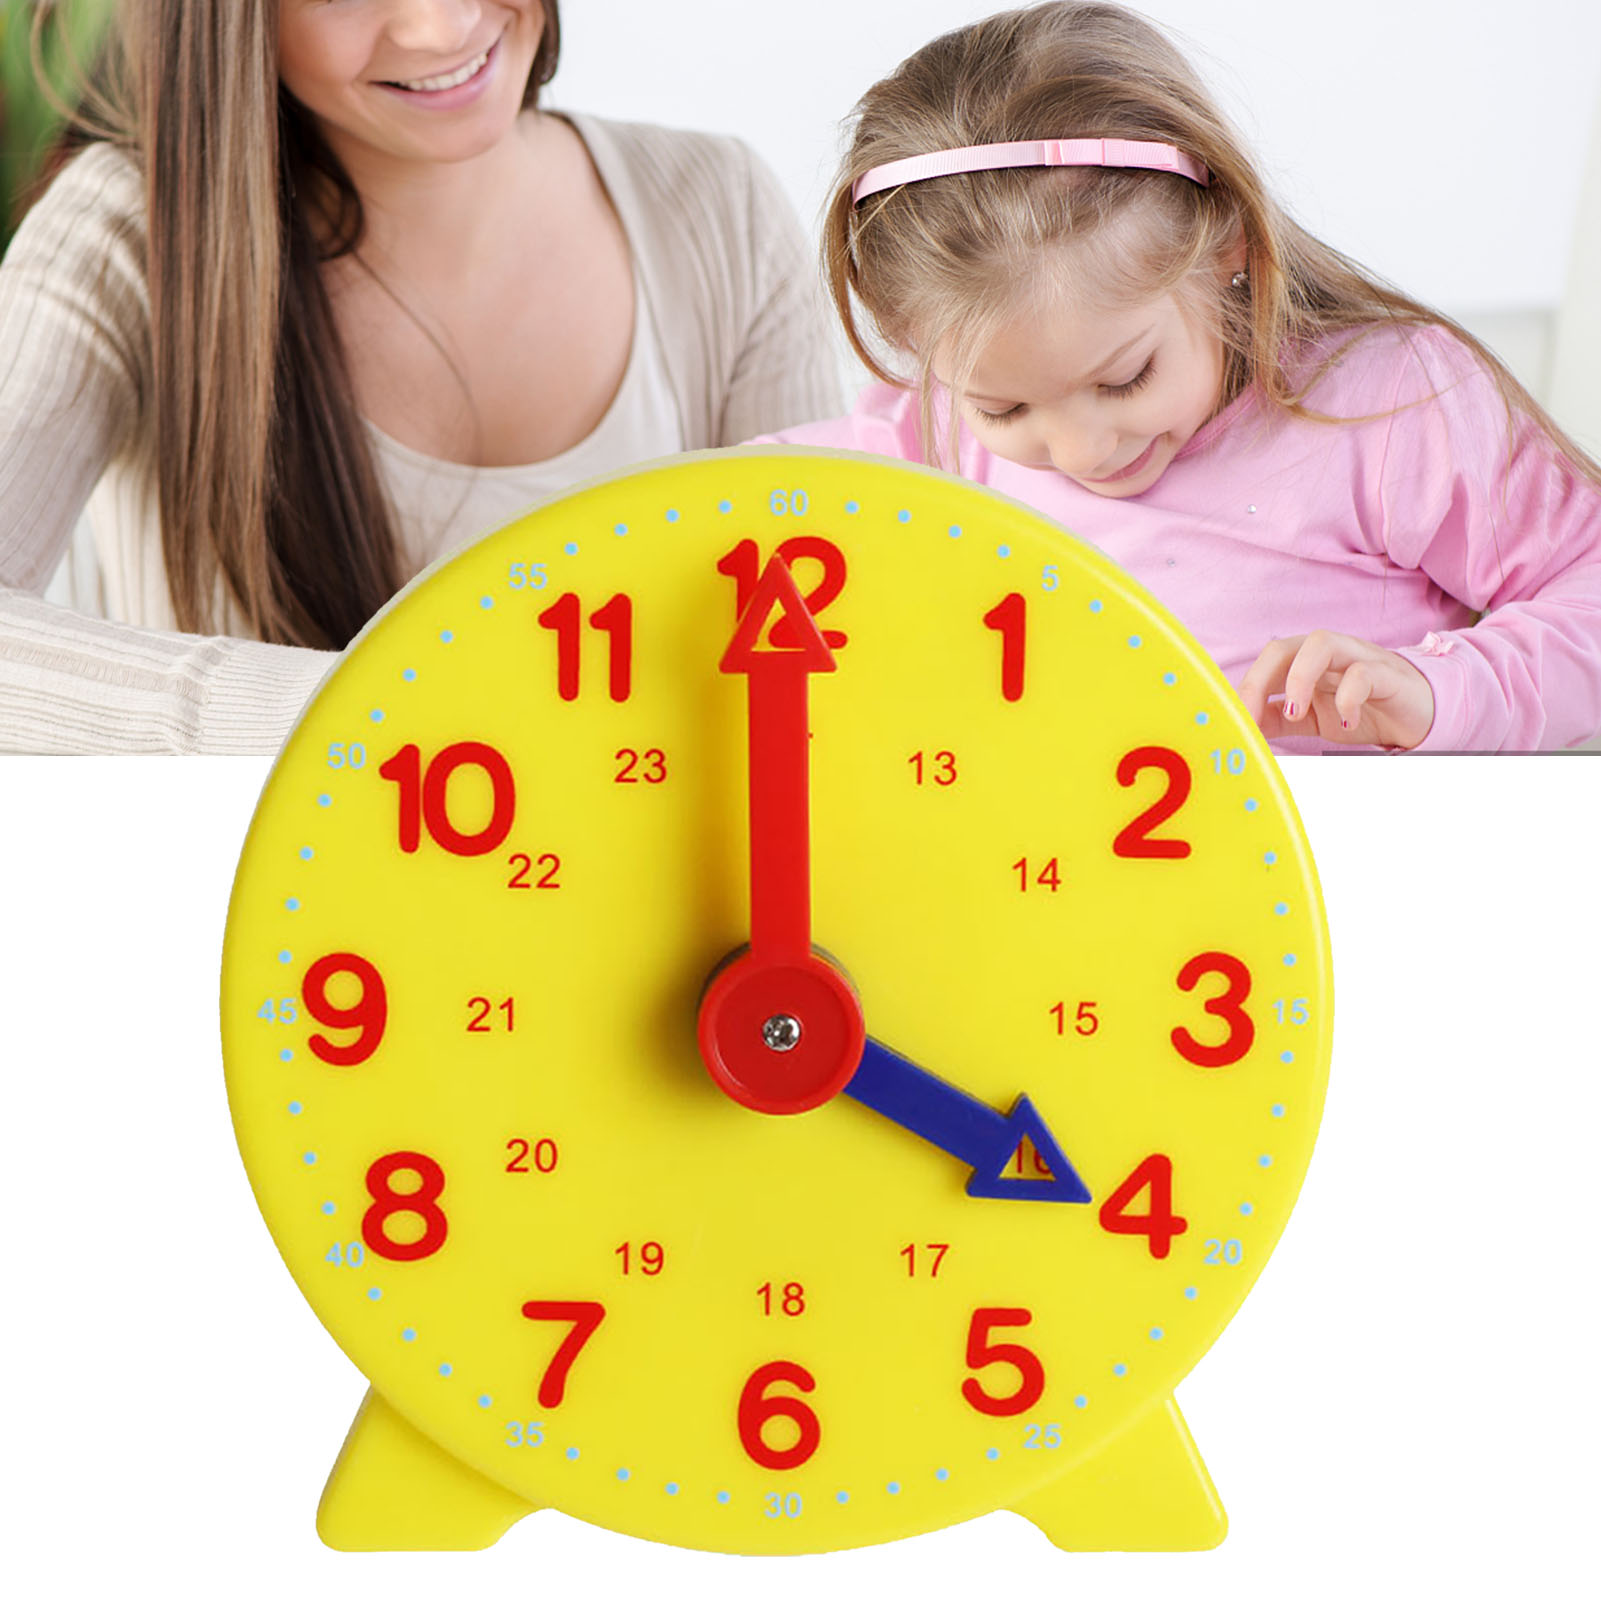 VEAREAR 10cm Plastic Clock Model Early Education Learning Kids Children Toy - image 4 of 6